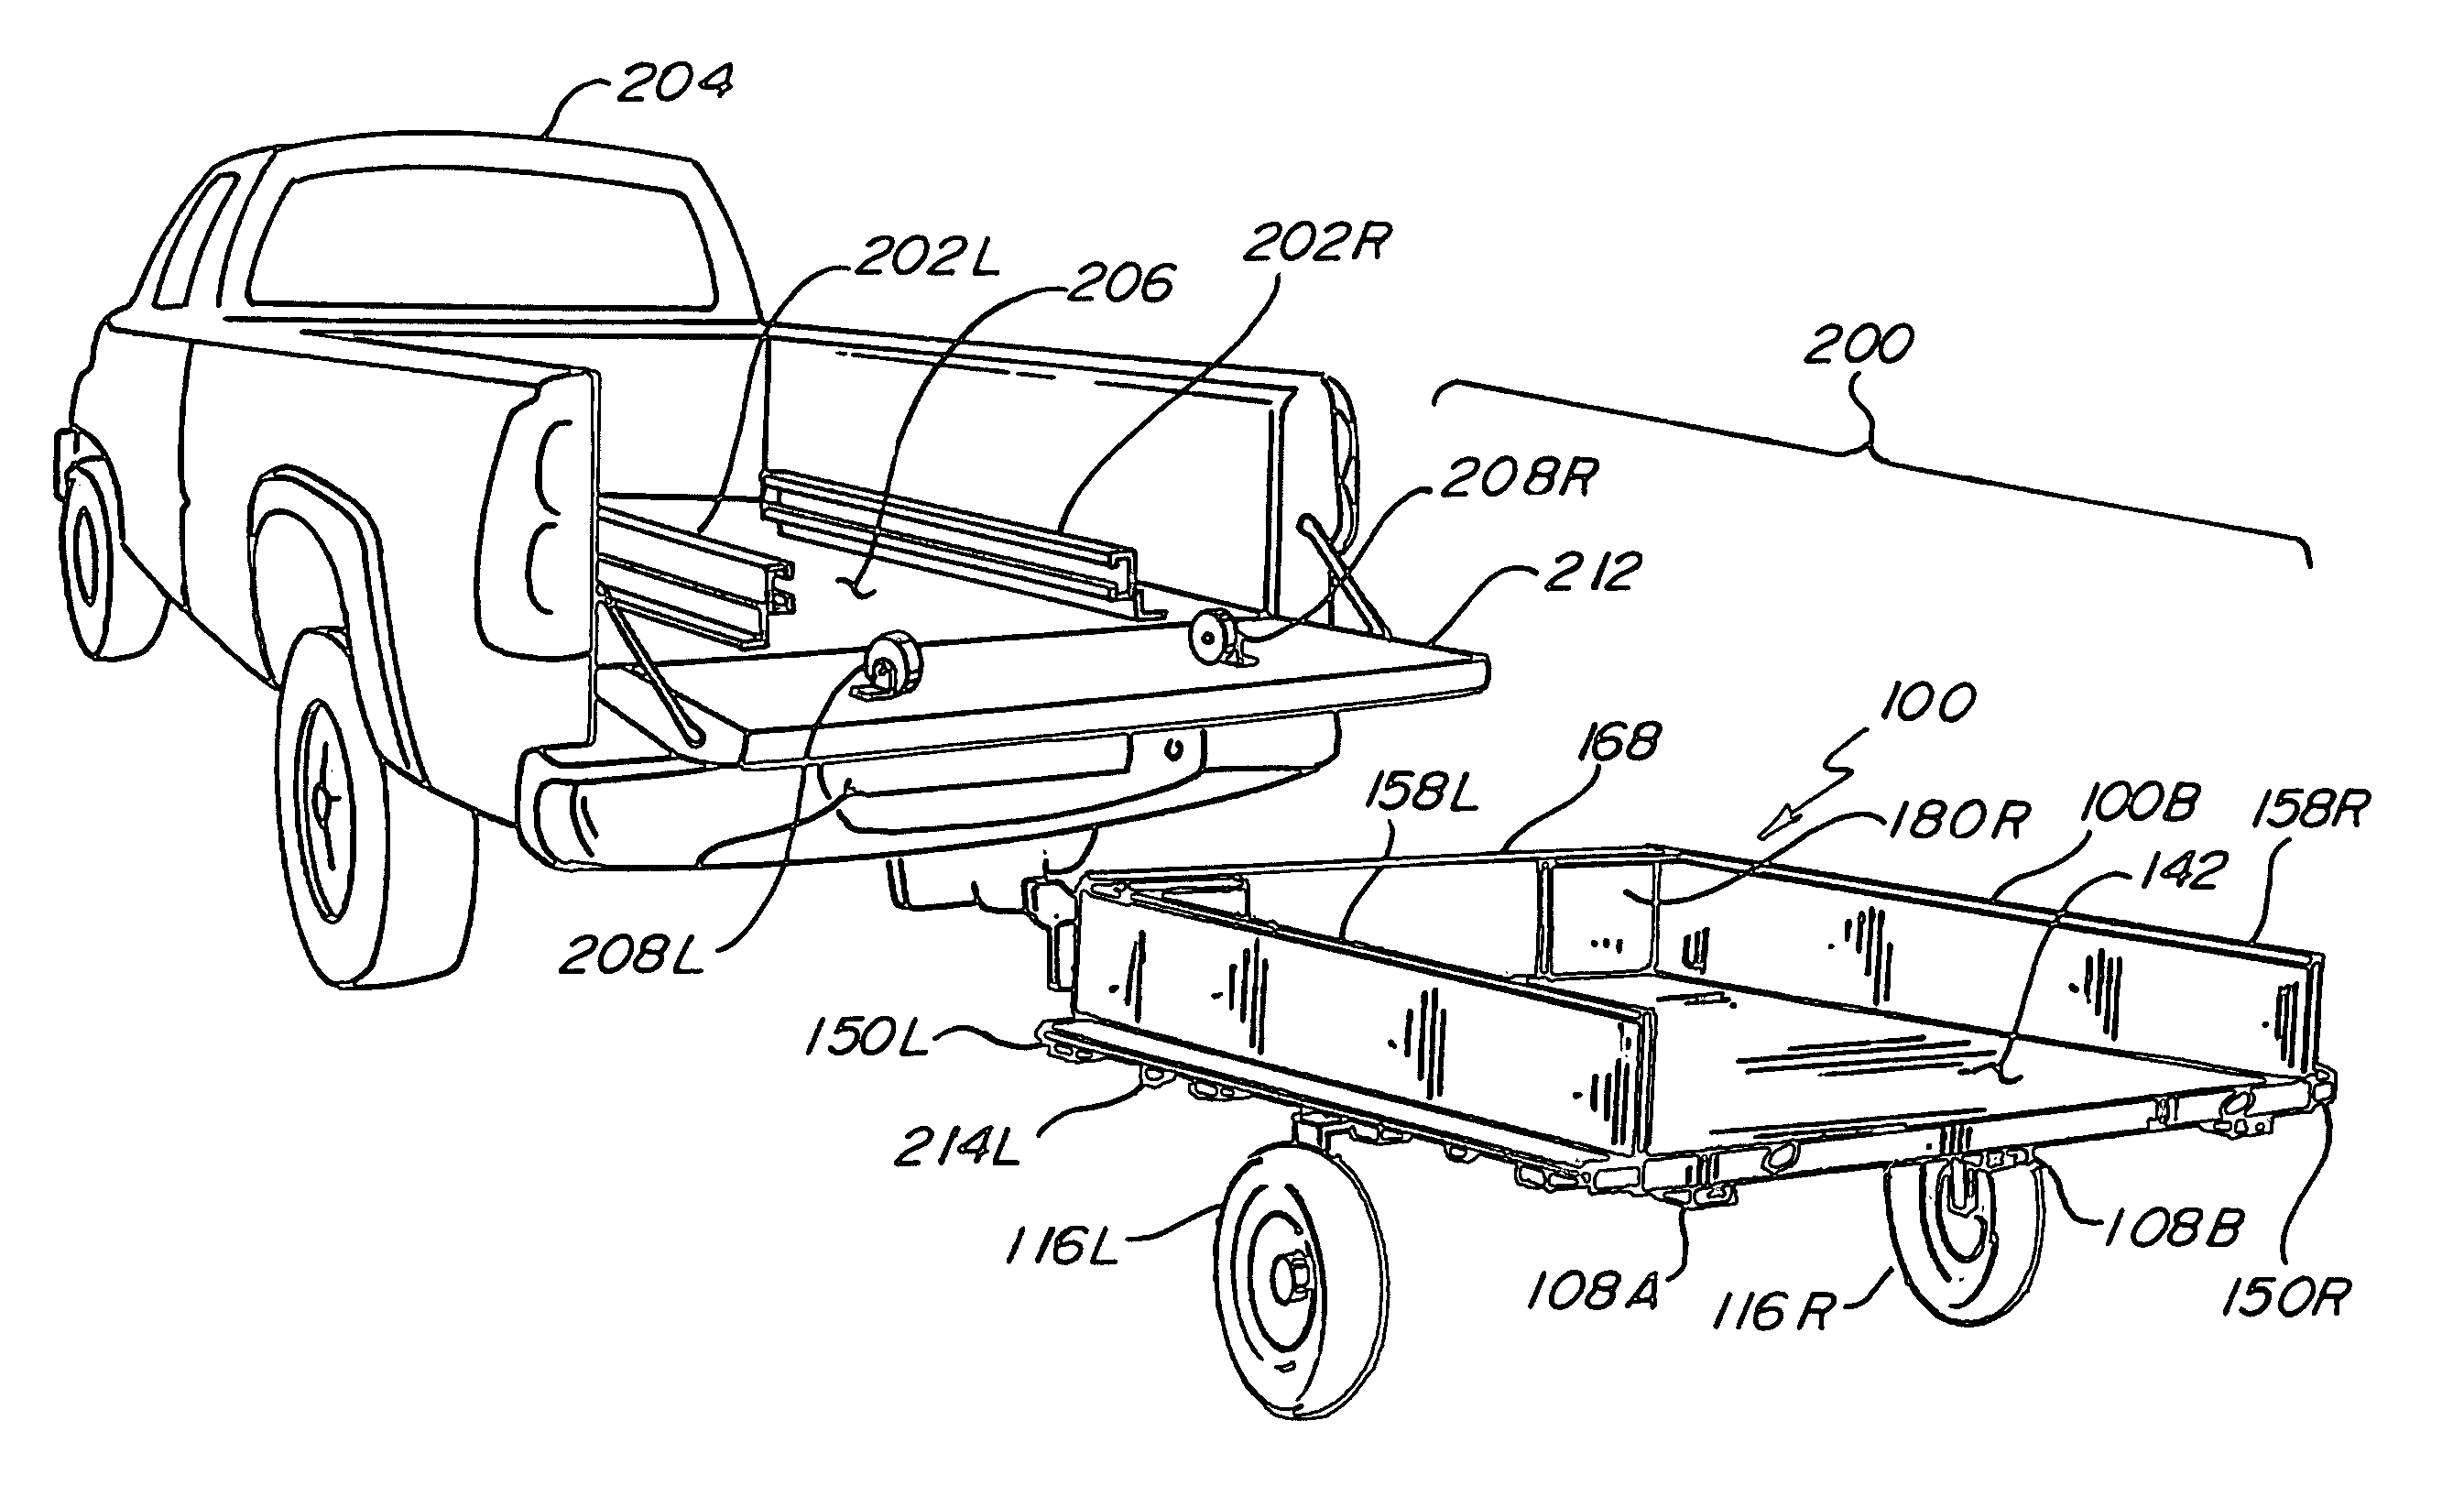 Stow-away trailer system